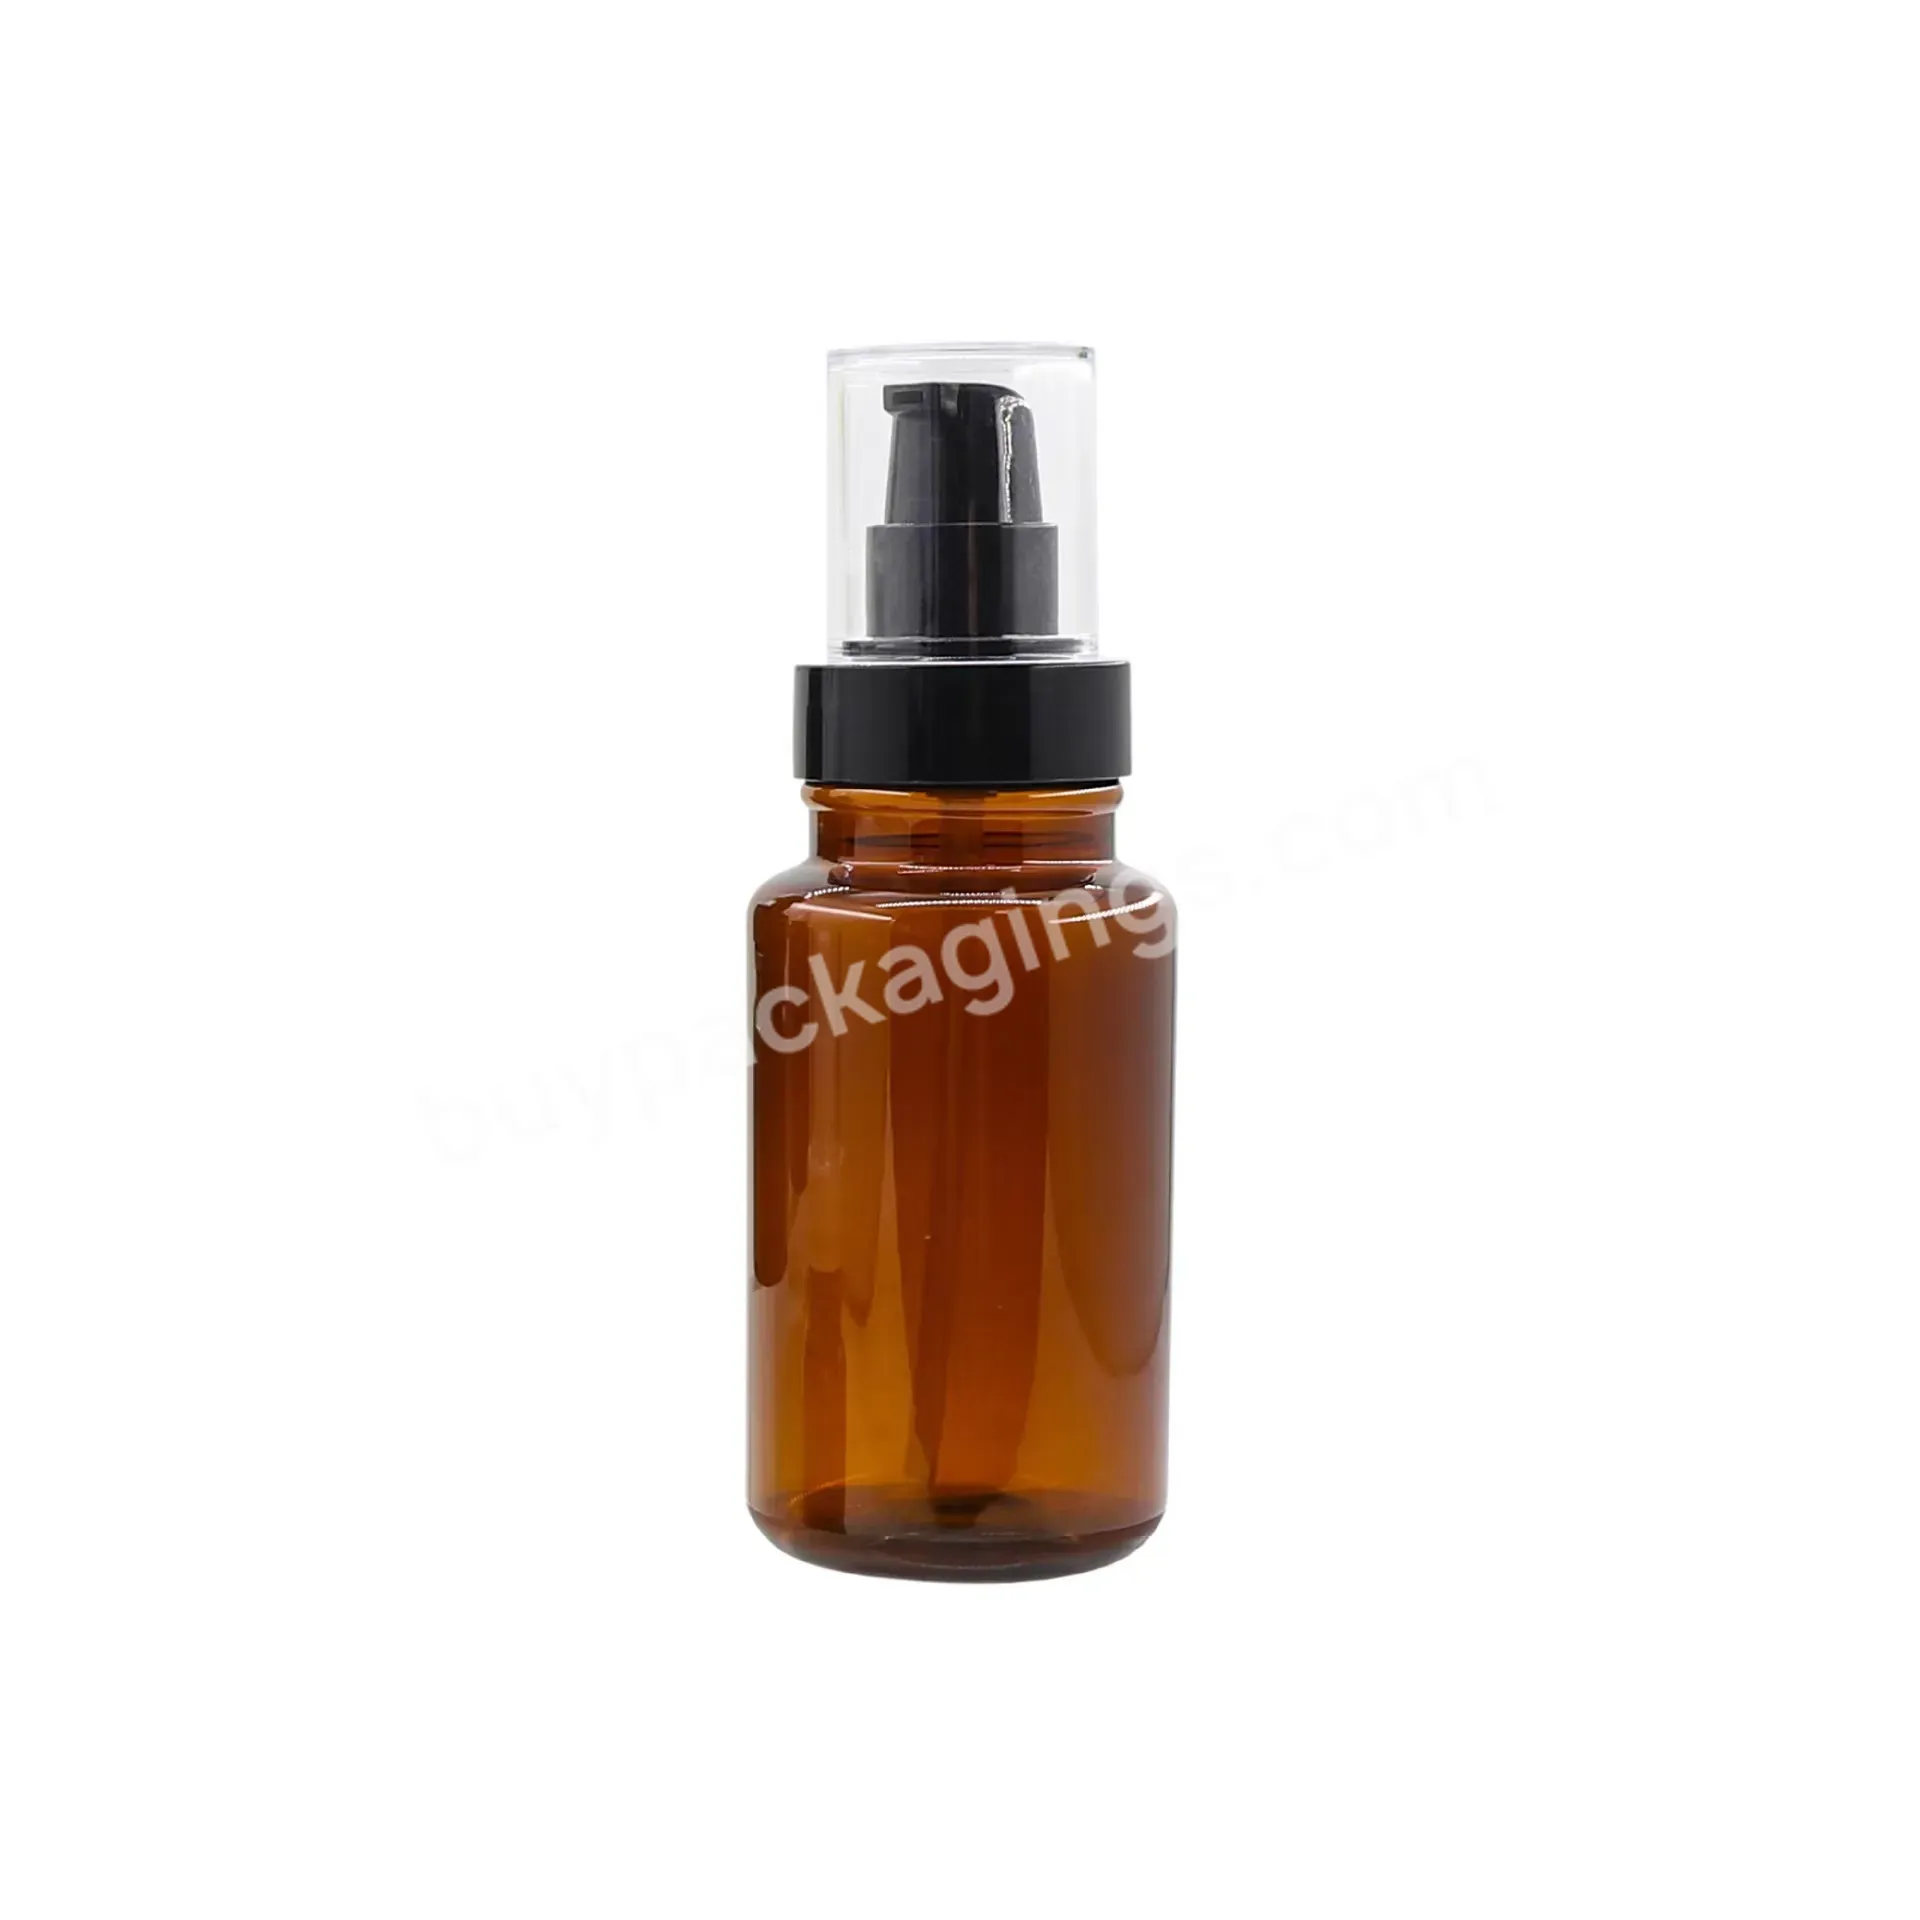 Luxury Skincare Packaging 100ml Amber Pet Plastic Dropper Serum Spray Airless Pump Bottle For Cosmetic Tube Lotion Cream Jar Set - Buy Wholesale 15ml - 500ml Empty Plastic 100ml Spray Bottles 100 Ml Pet Spray Bottle With Fine Mist Sprayer,Foaming Bot